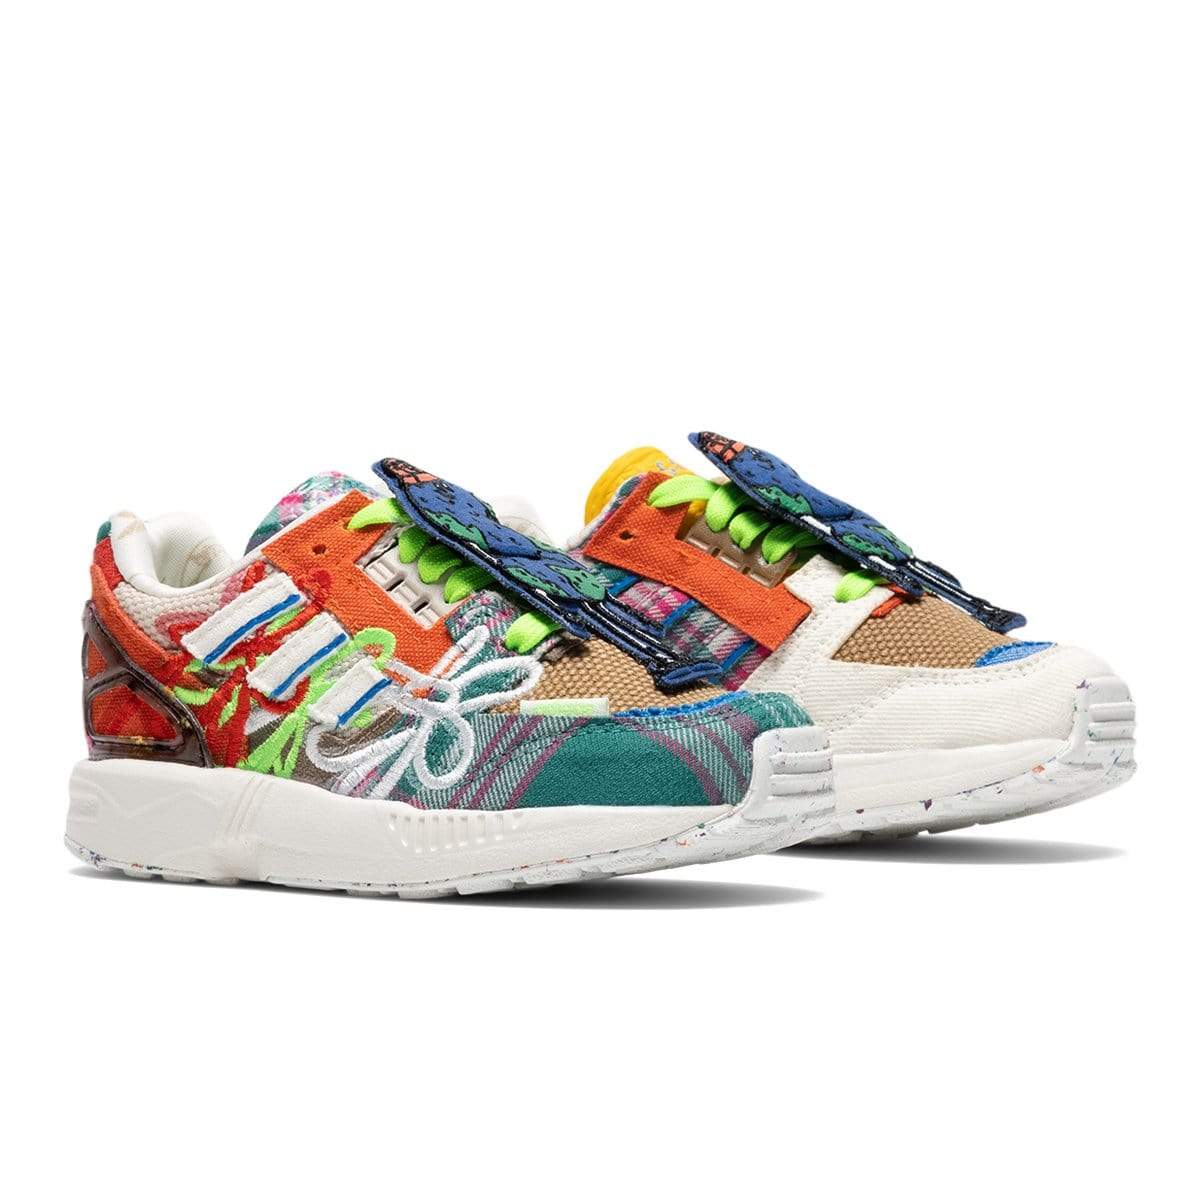 adidas Casual x Sean Wotherspoon ZX 8000 SUPEREARTH I (Kids)